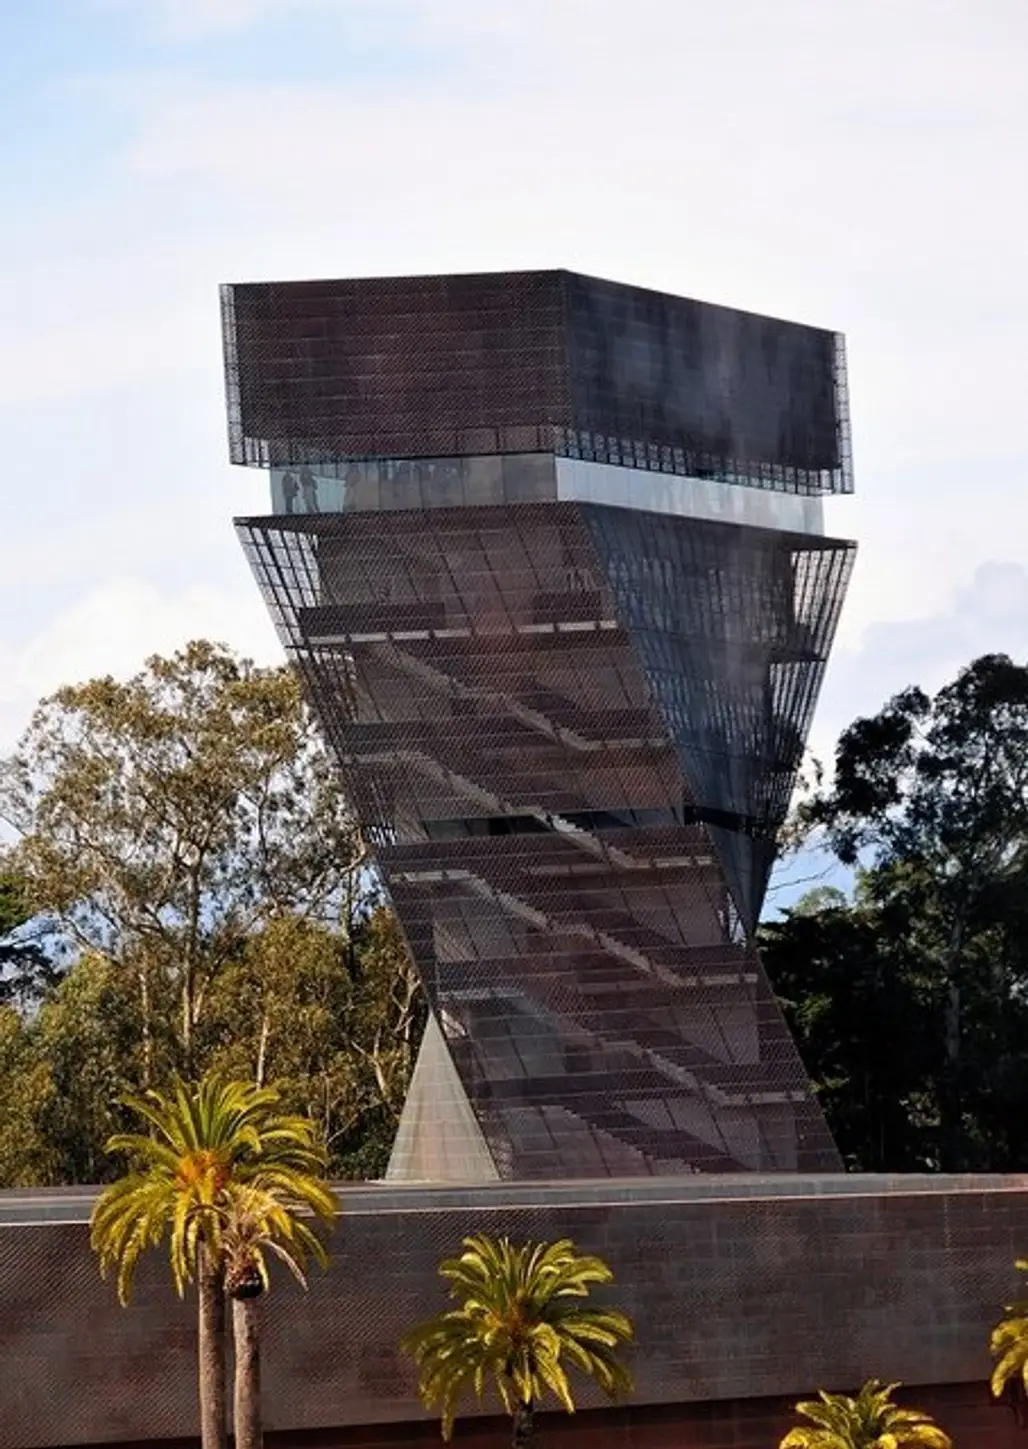 The De Young Museum